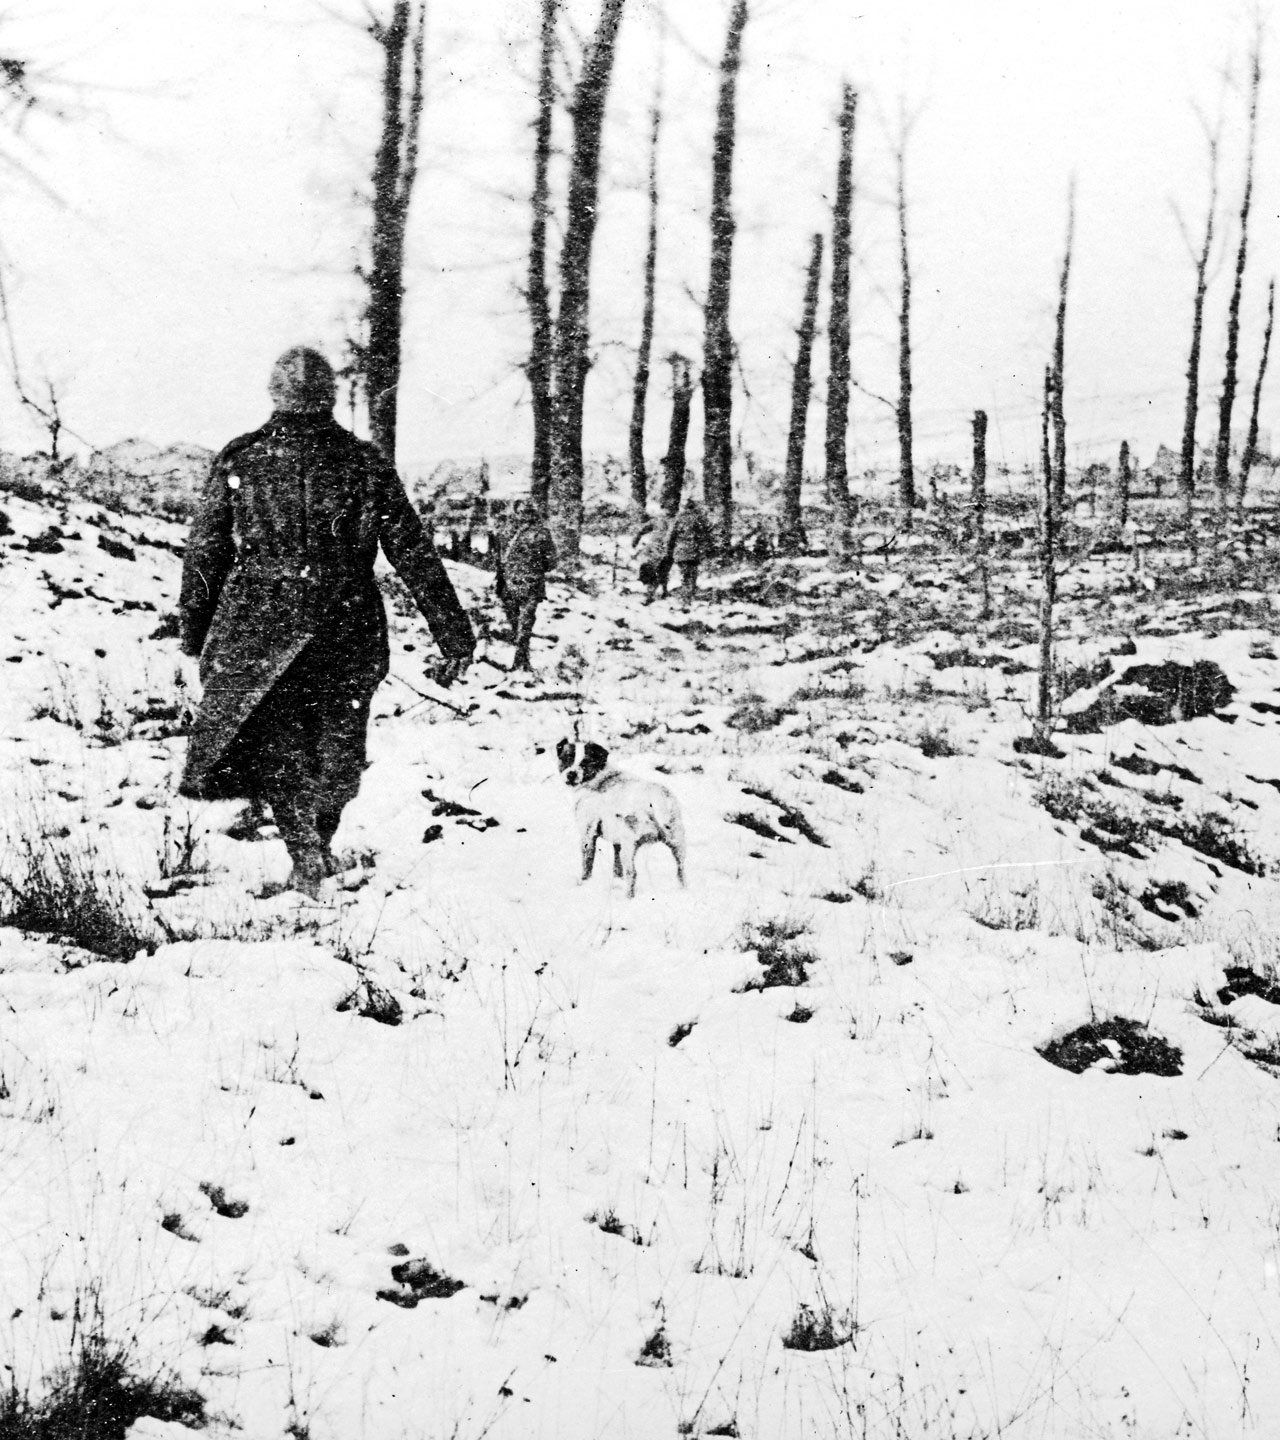 Winter landscape showing desolation caused by shelling near Verdun